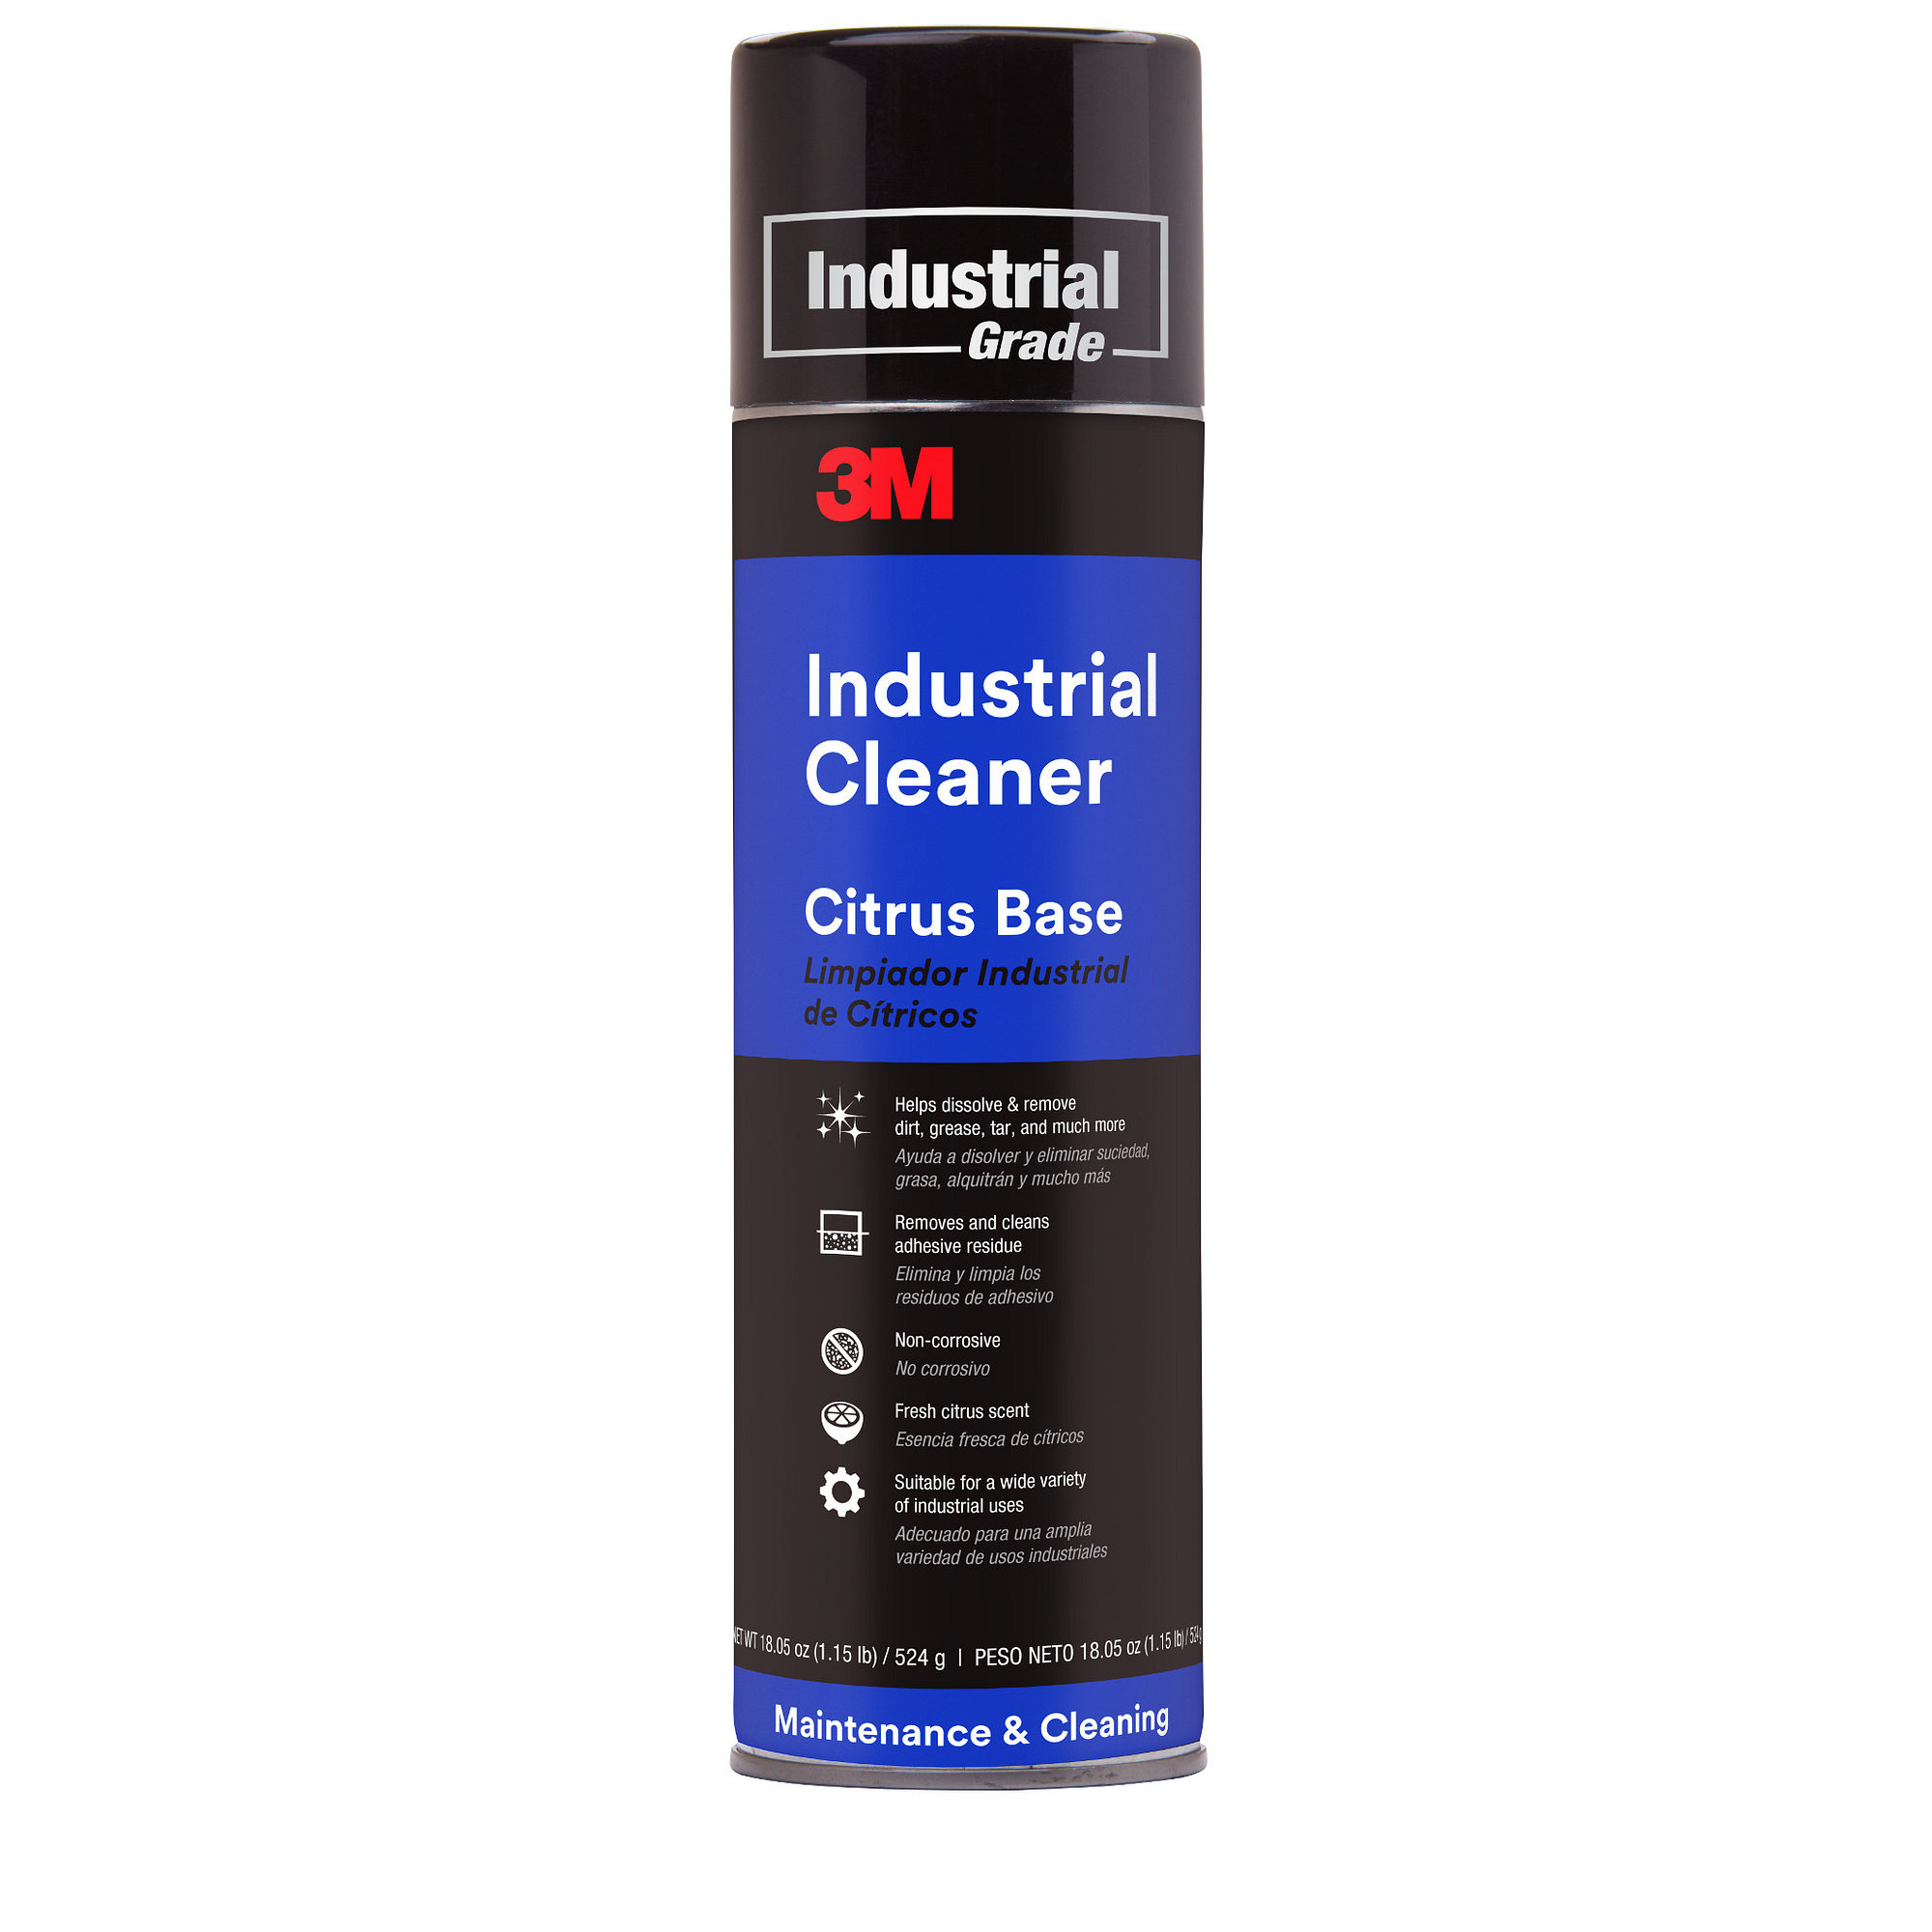 3M General Purpose Adhesive Cleaner / Release Agent